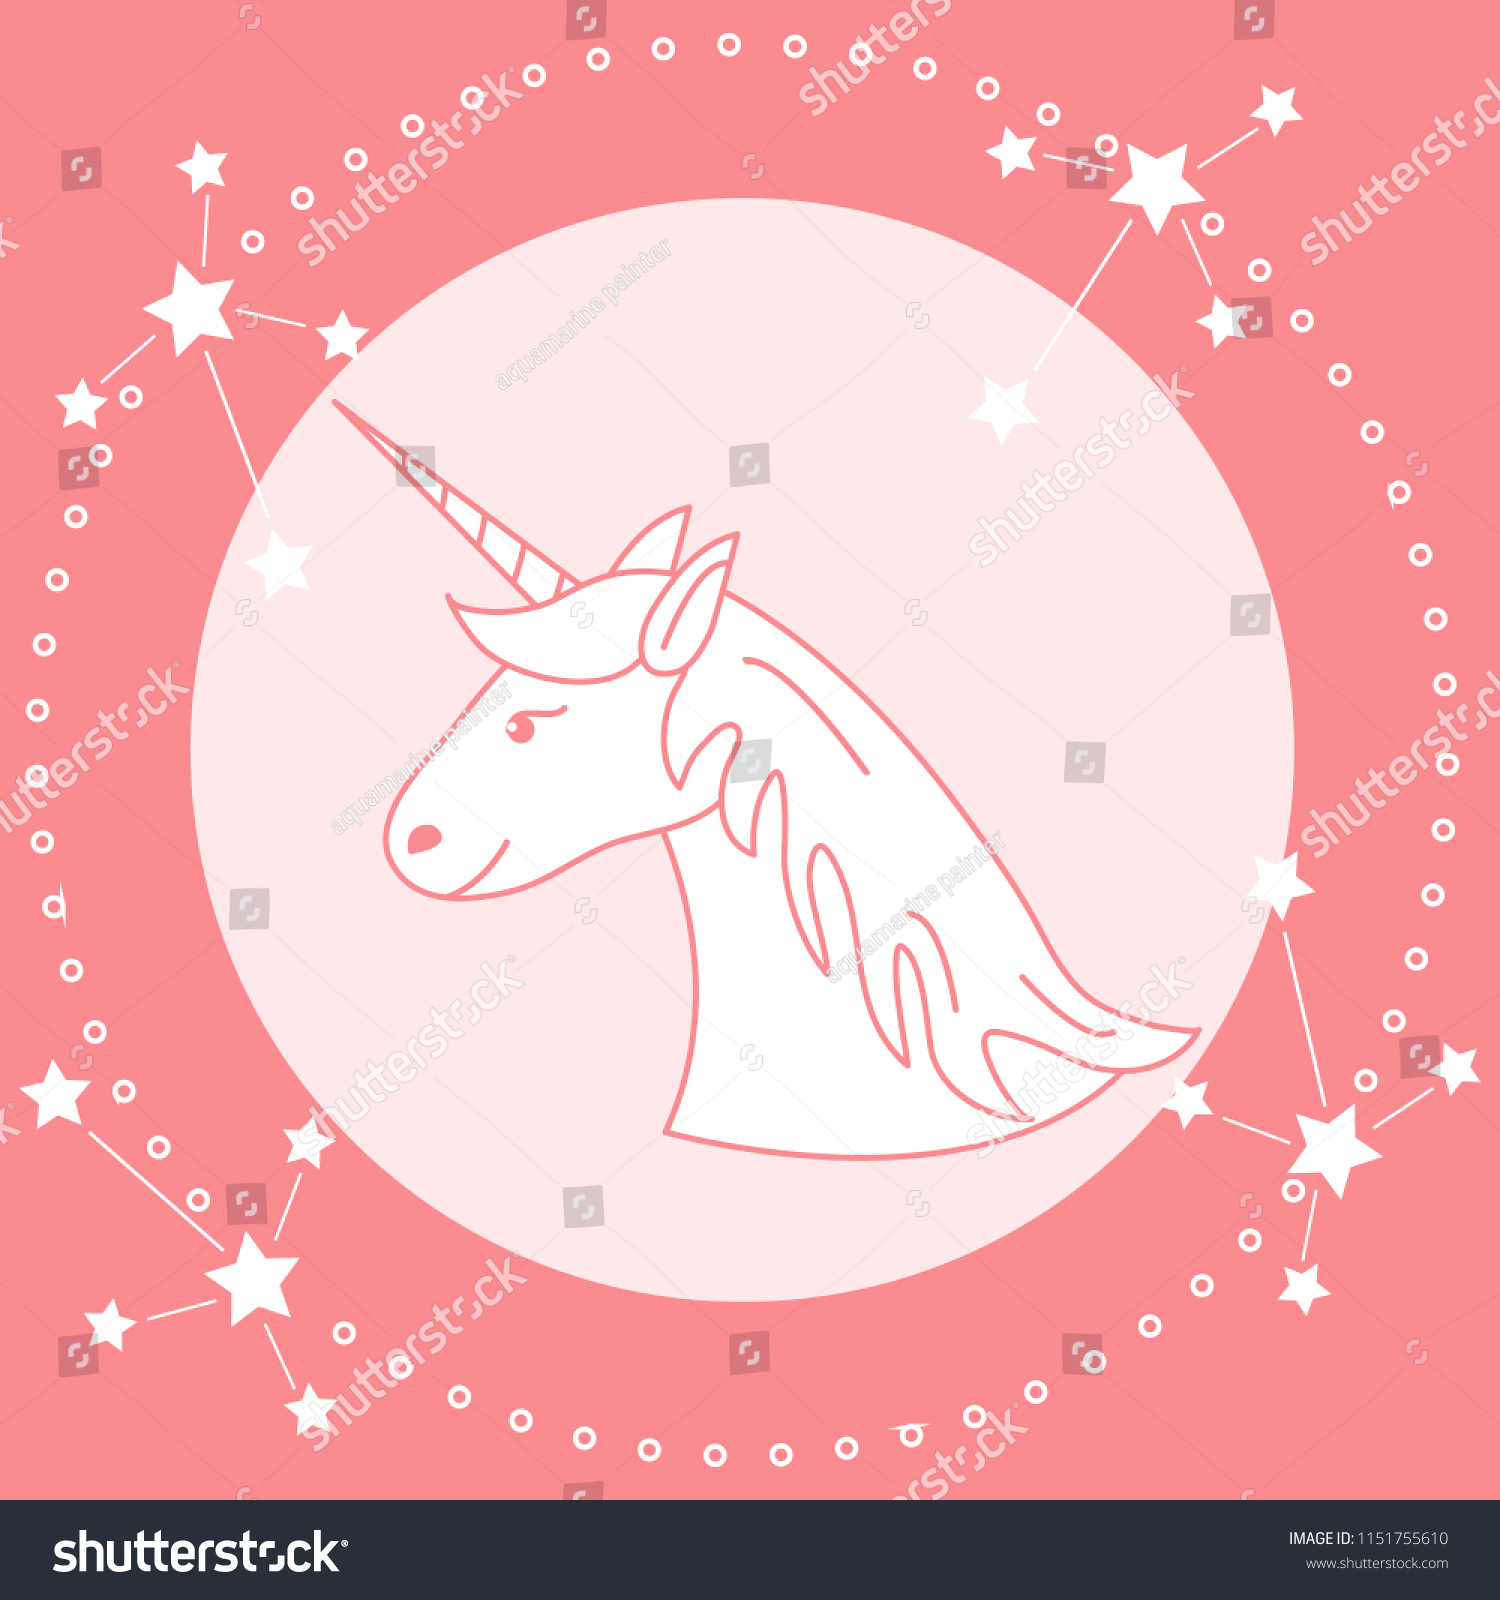 Magic unicorn and constellations. Design for children graphic, t-shirt, cover, gift card, poster. #1151755610